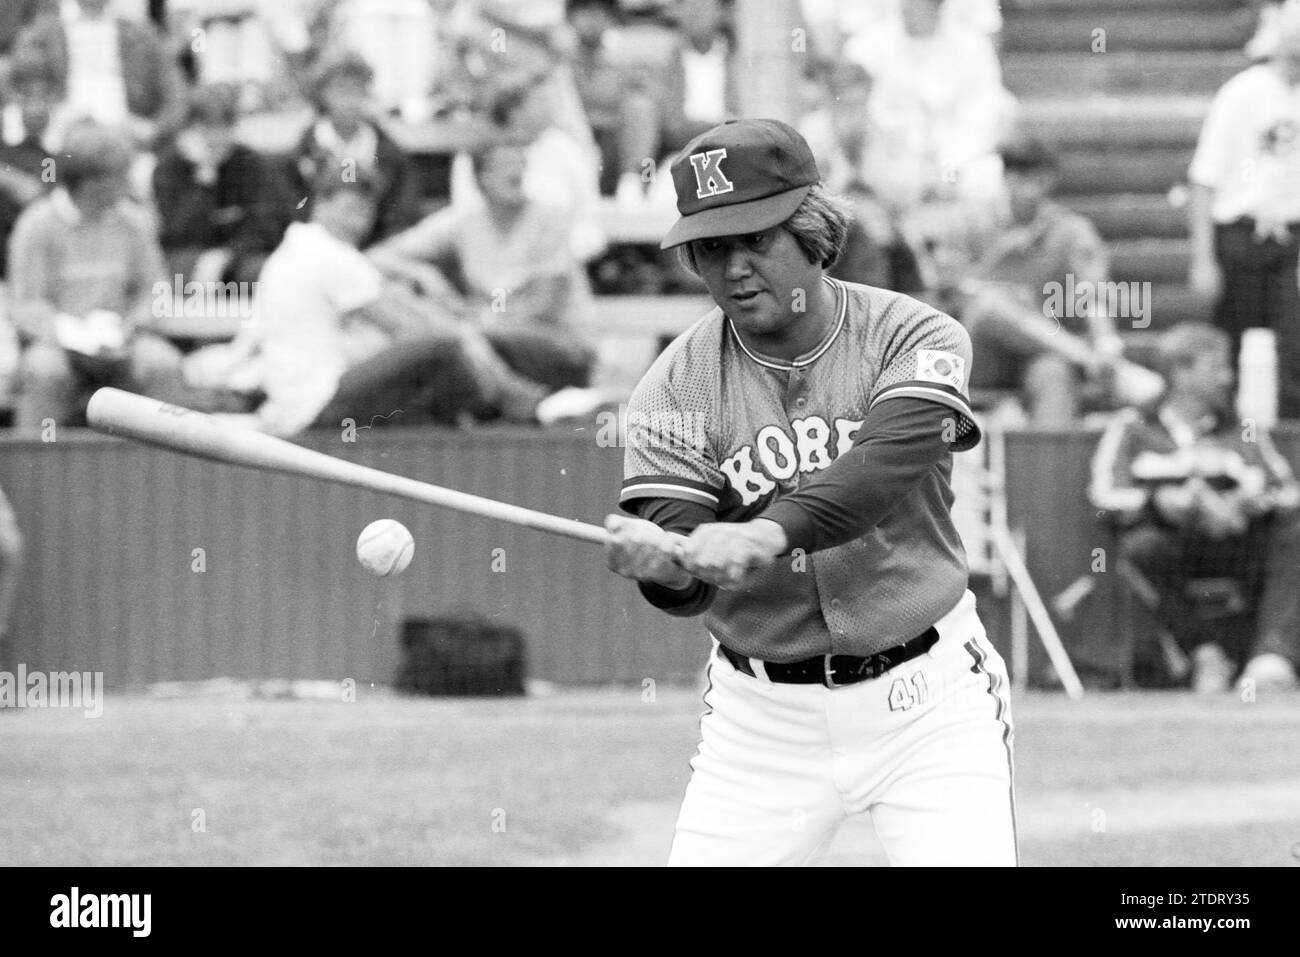 Coach Korea, B.W. Kim, 1986 Baseball World Championships, 21-07-1986, Whizgle News from the Past, Tailored for the Future. Explore historical narratives, Dutch The Netherlands agency image with a modern perspective, bridging the gap between yesterday's events and tomorrow's insights. A timeless journey shaping the stories that shape our future Stock Photo